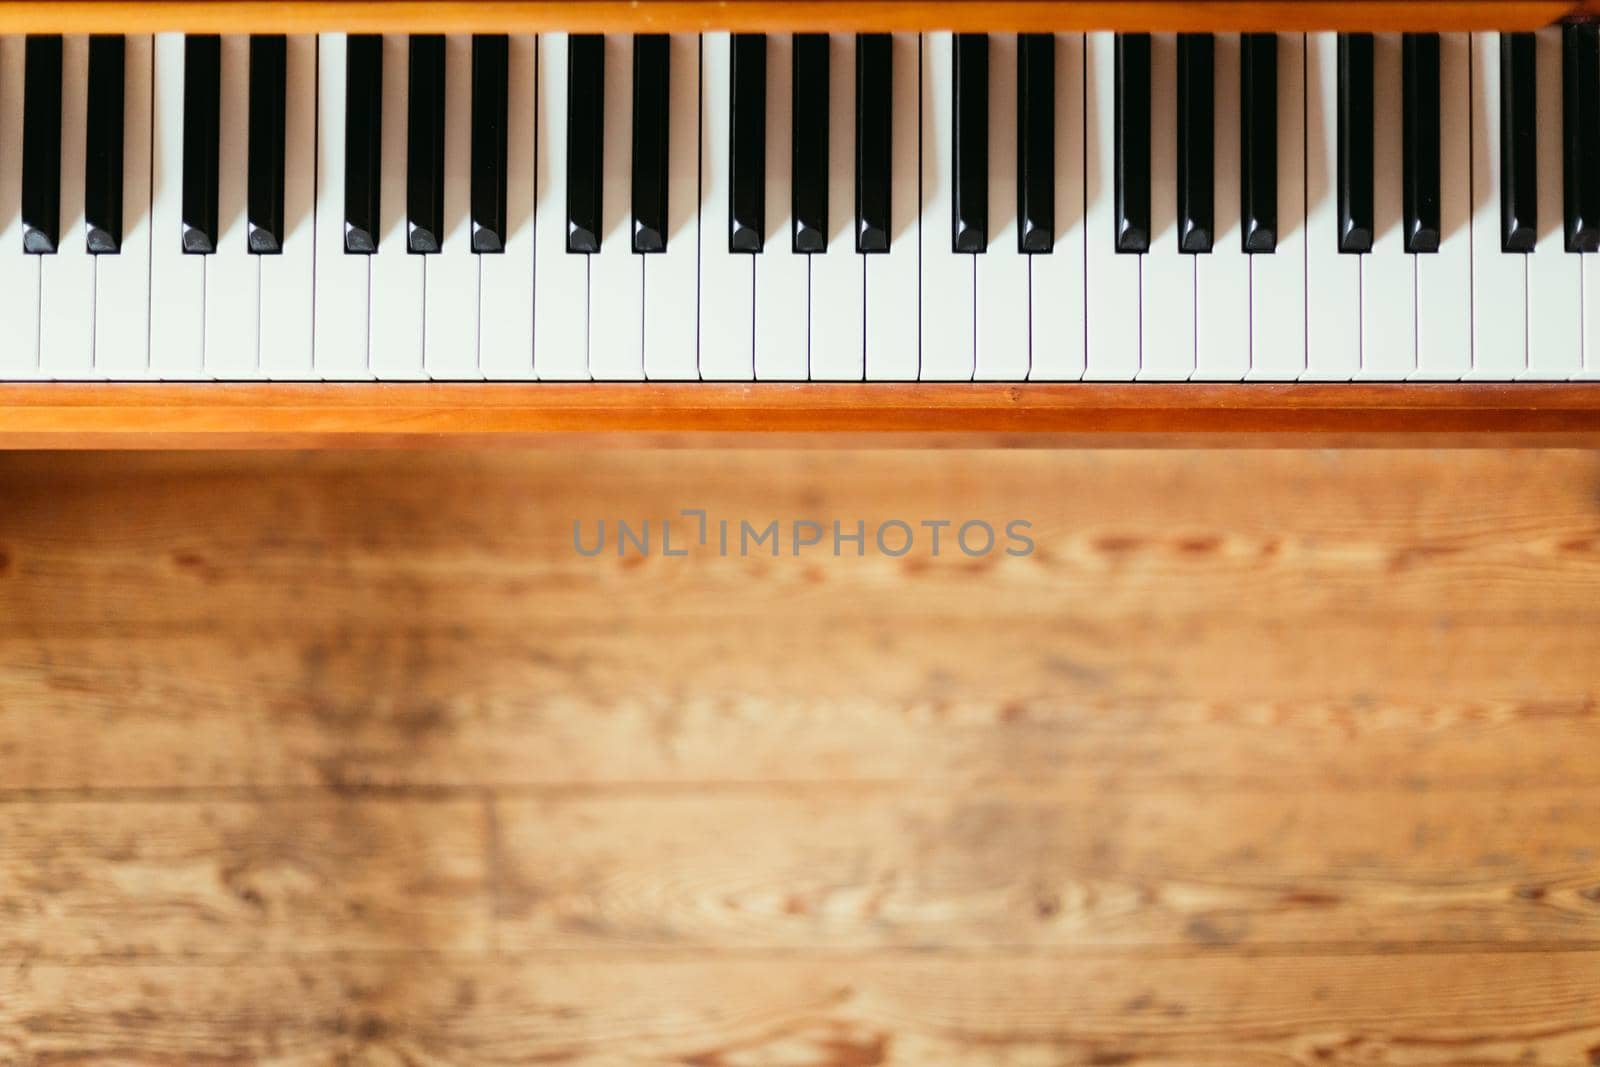 Vintage wooden piano. Keys in the foreground, wooden floor with text space in the blurry background by Daxenbichler